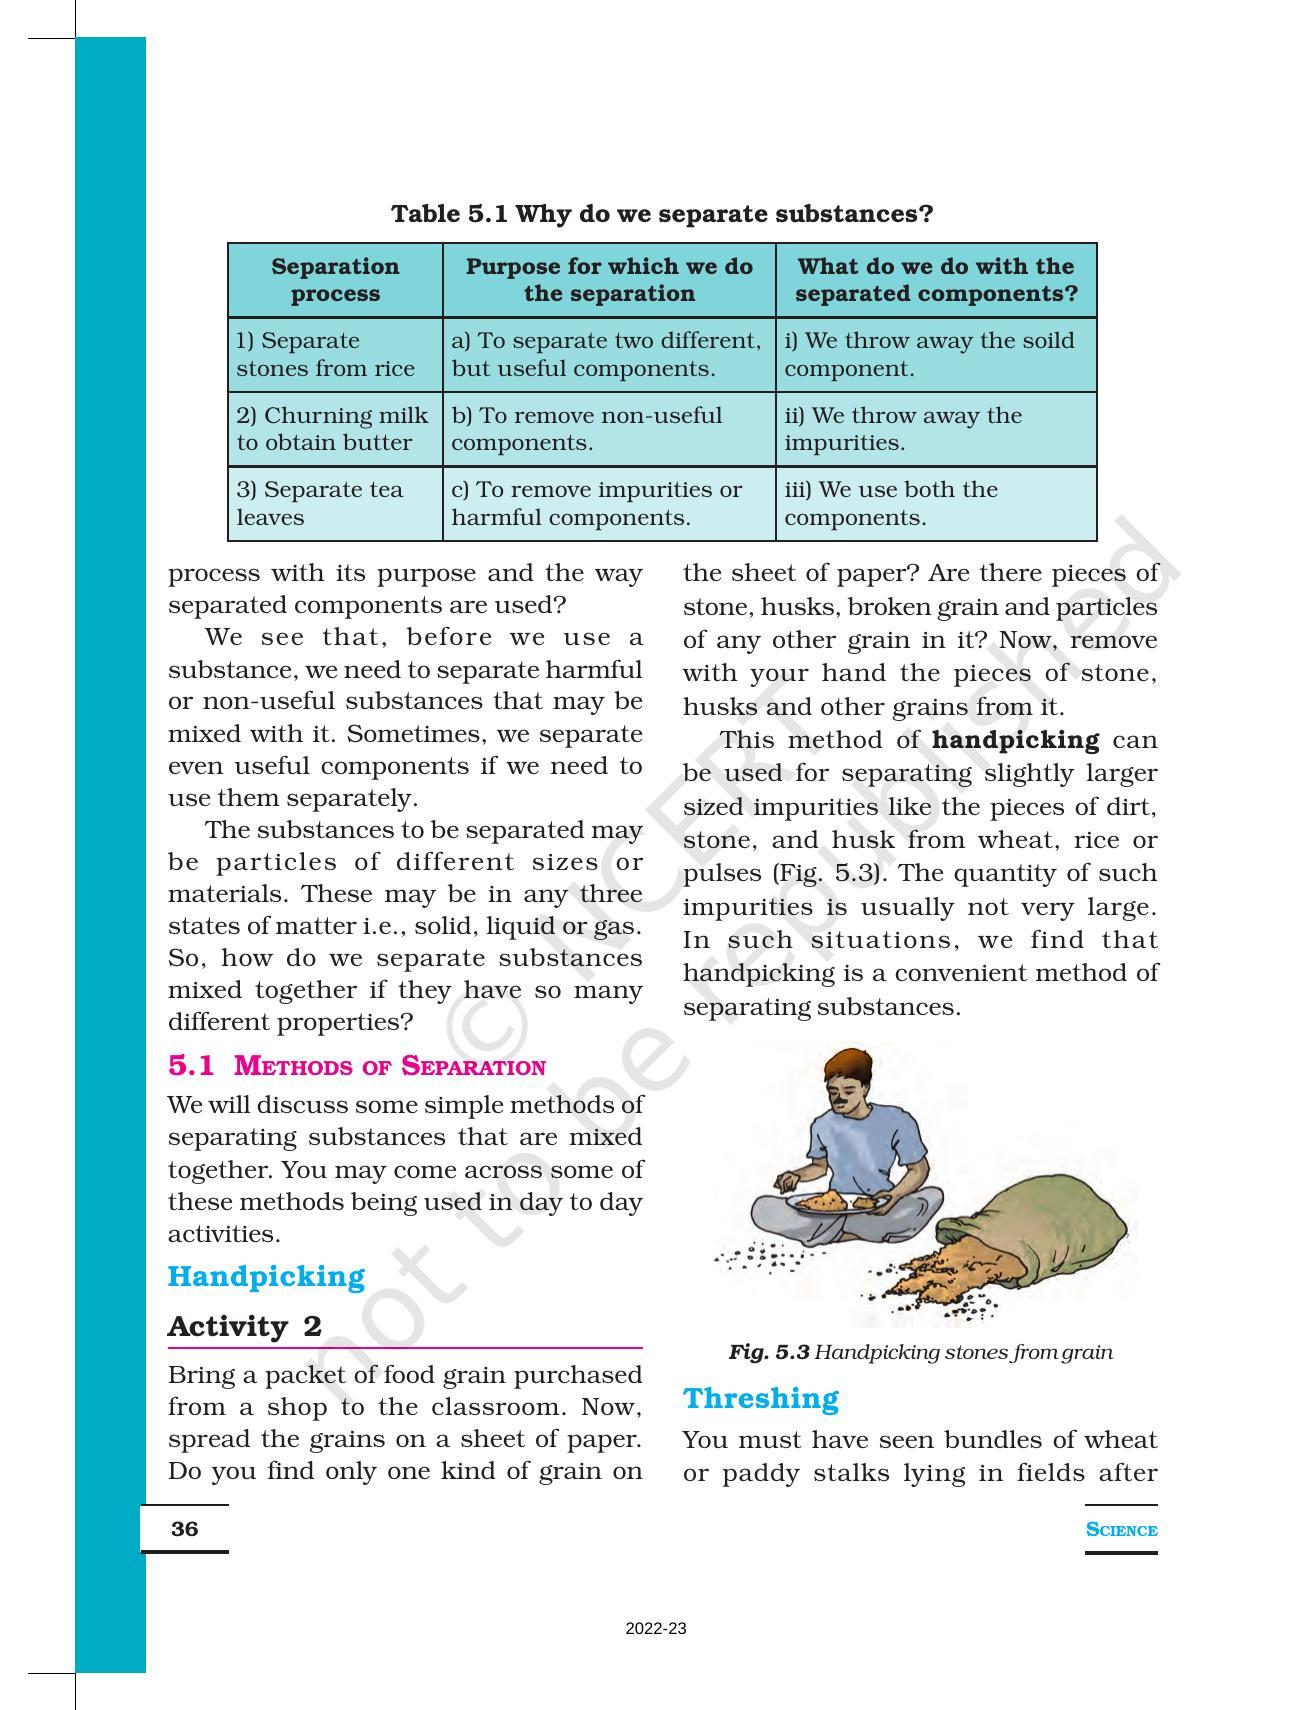 NCERT Book for Class 6 Science: Chapter 5-Separation of Substances - Page 2